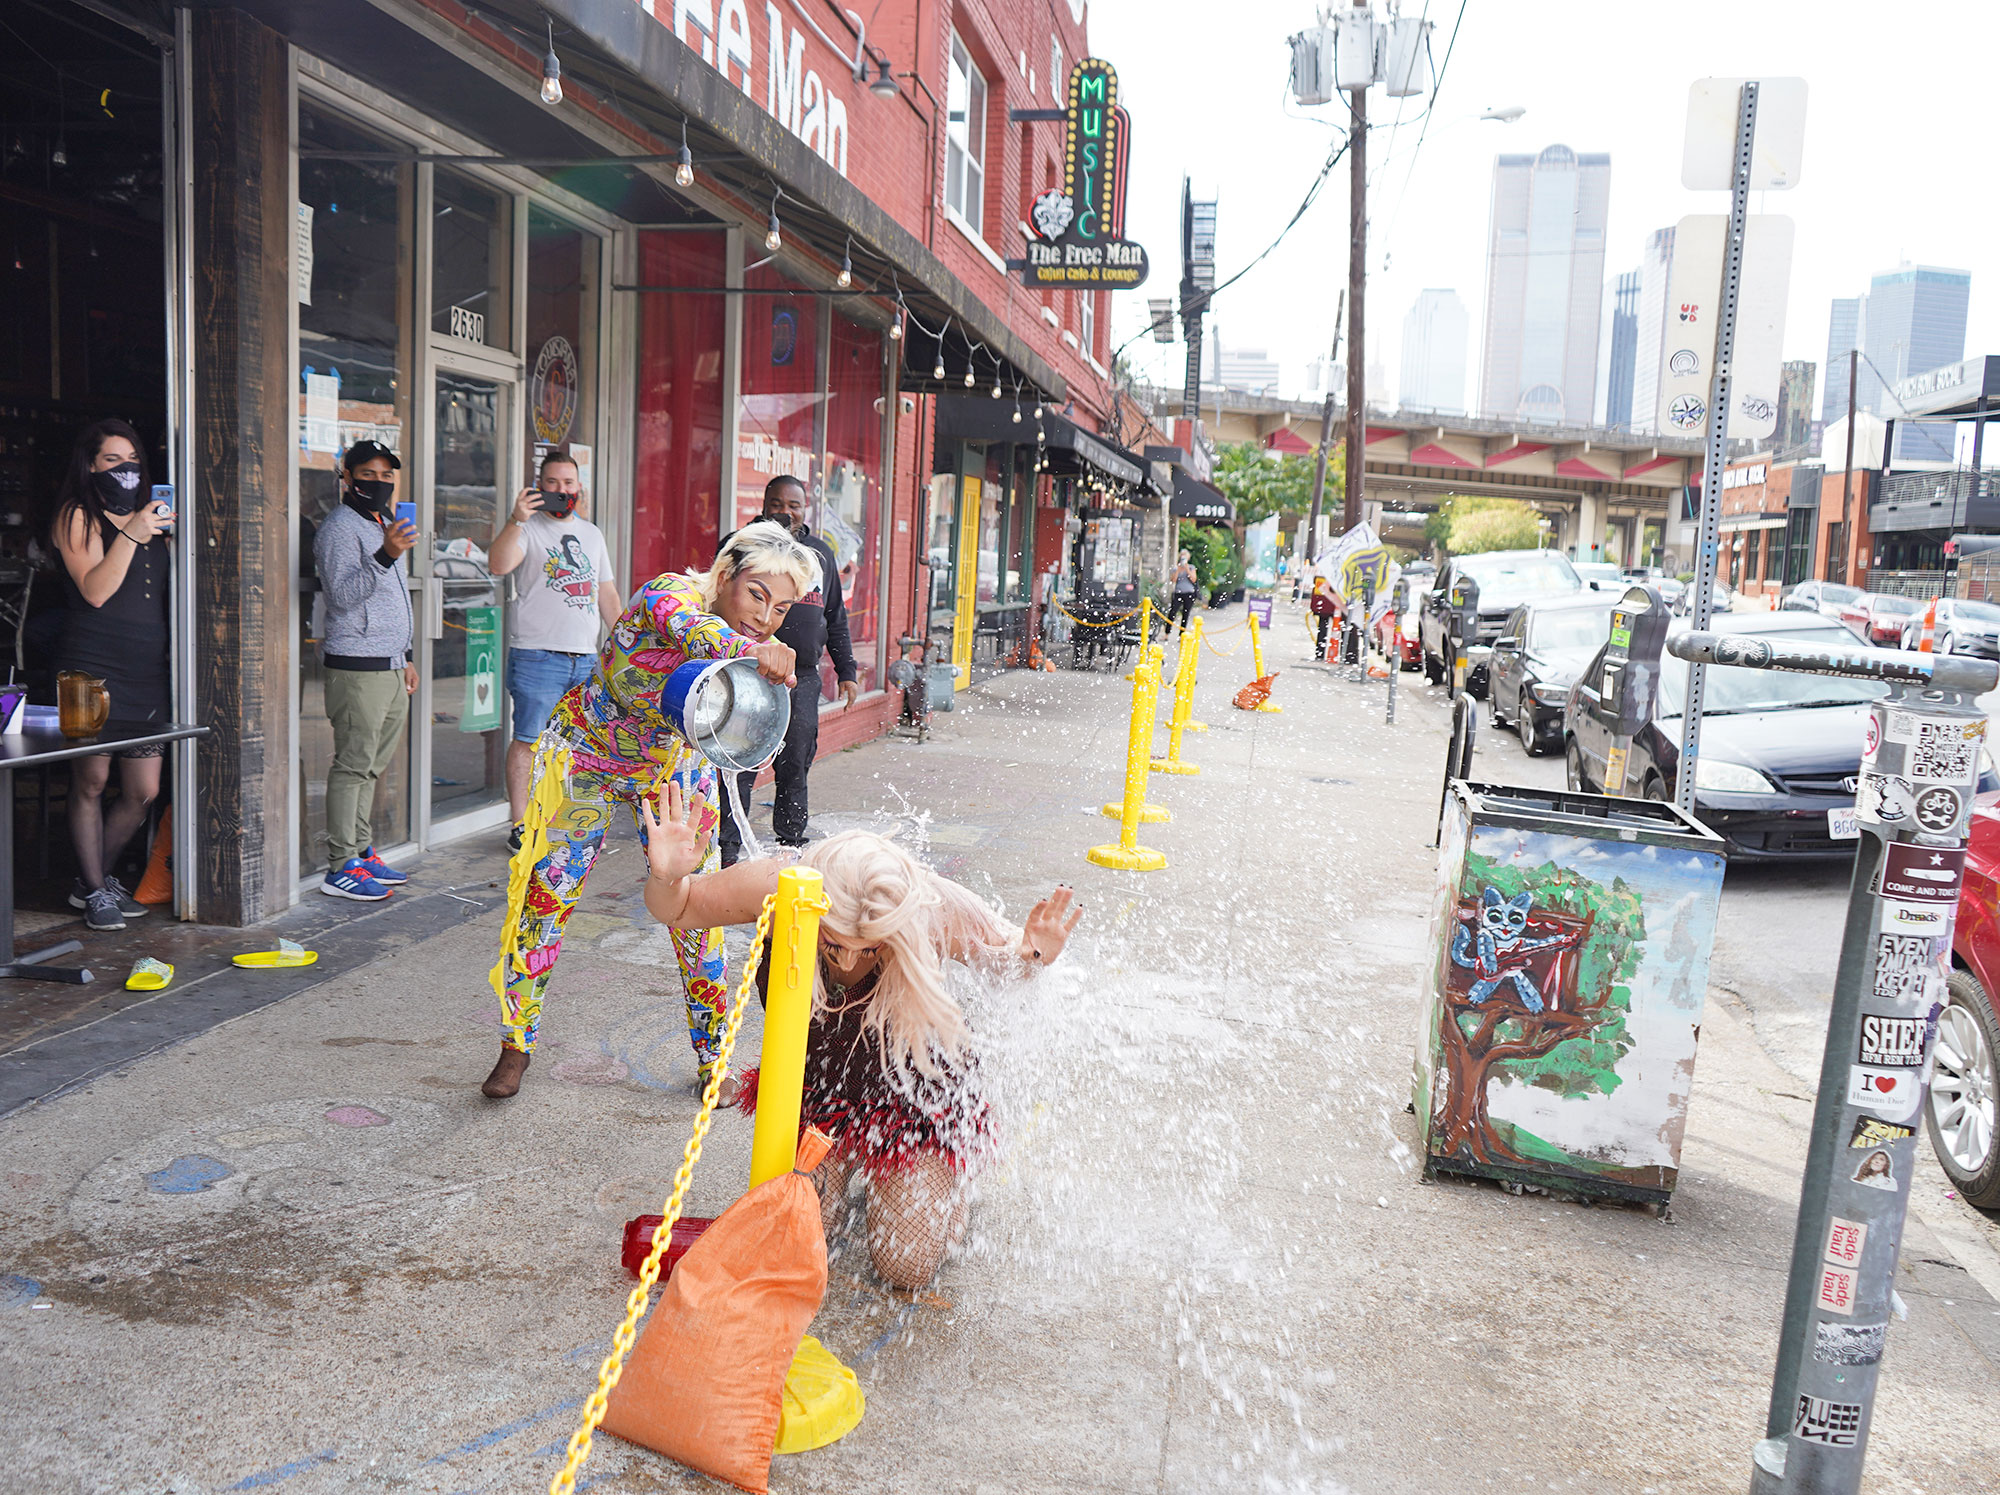 A water fight at Dallas drag brunch.